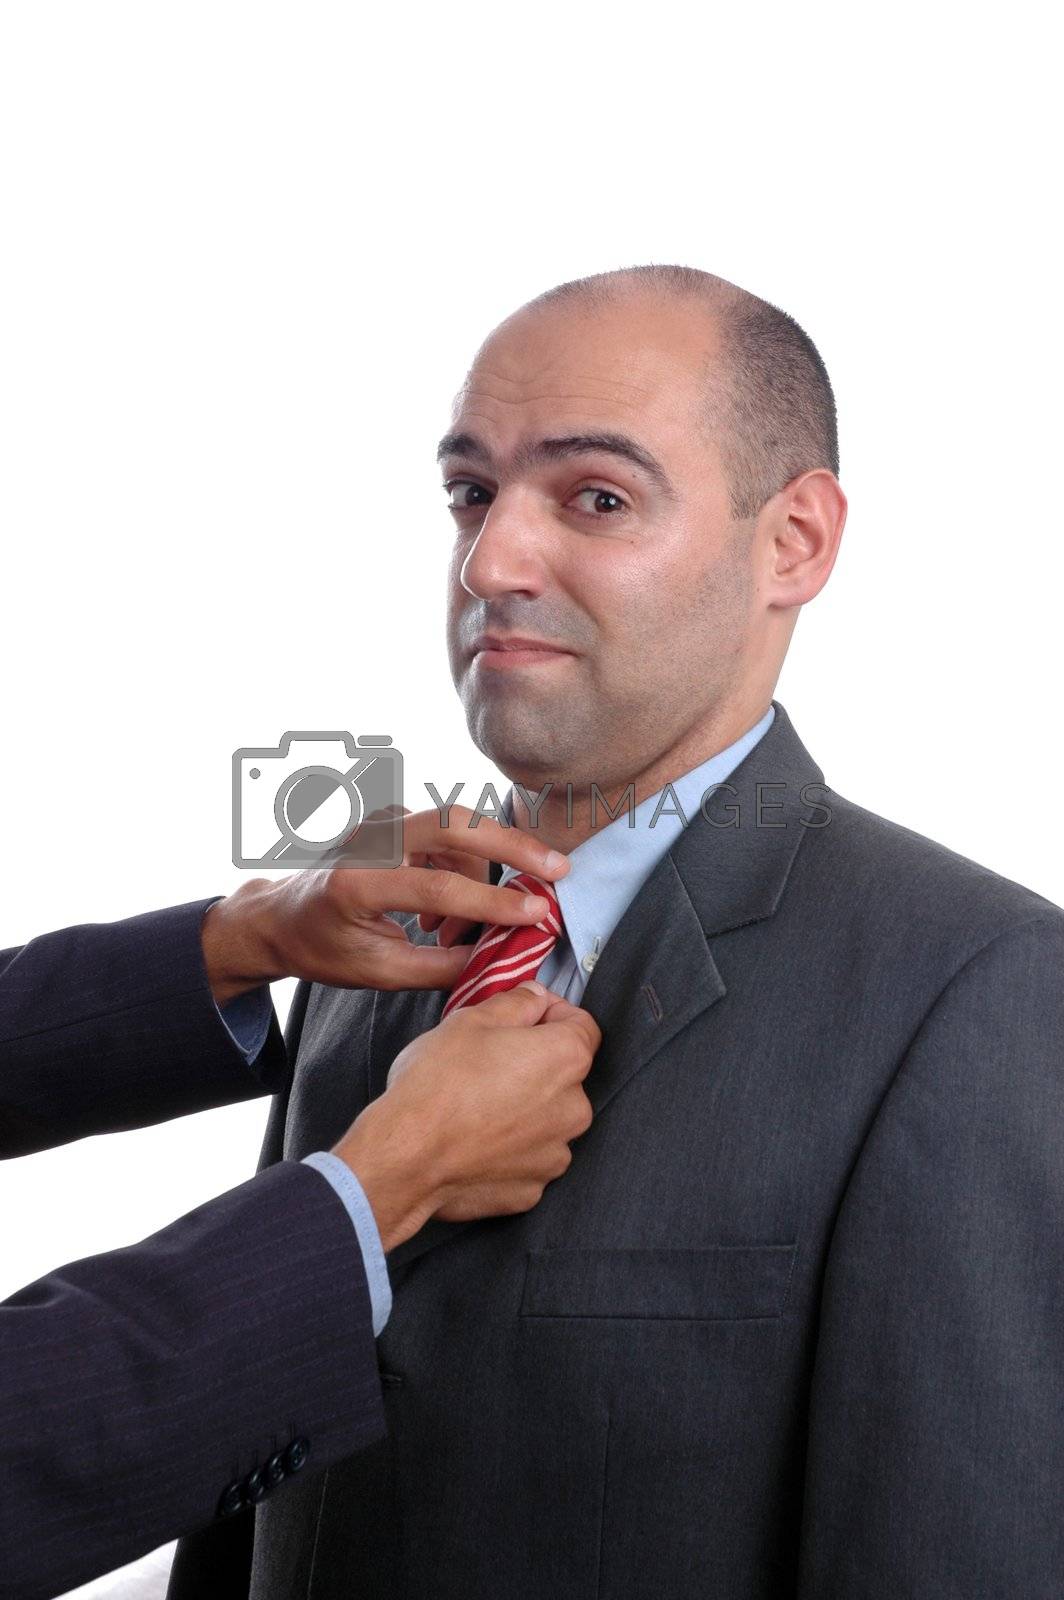 Royalty free image of two hand adjusting tie by raalves